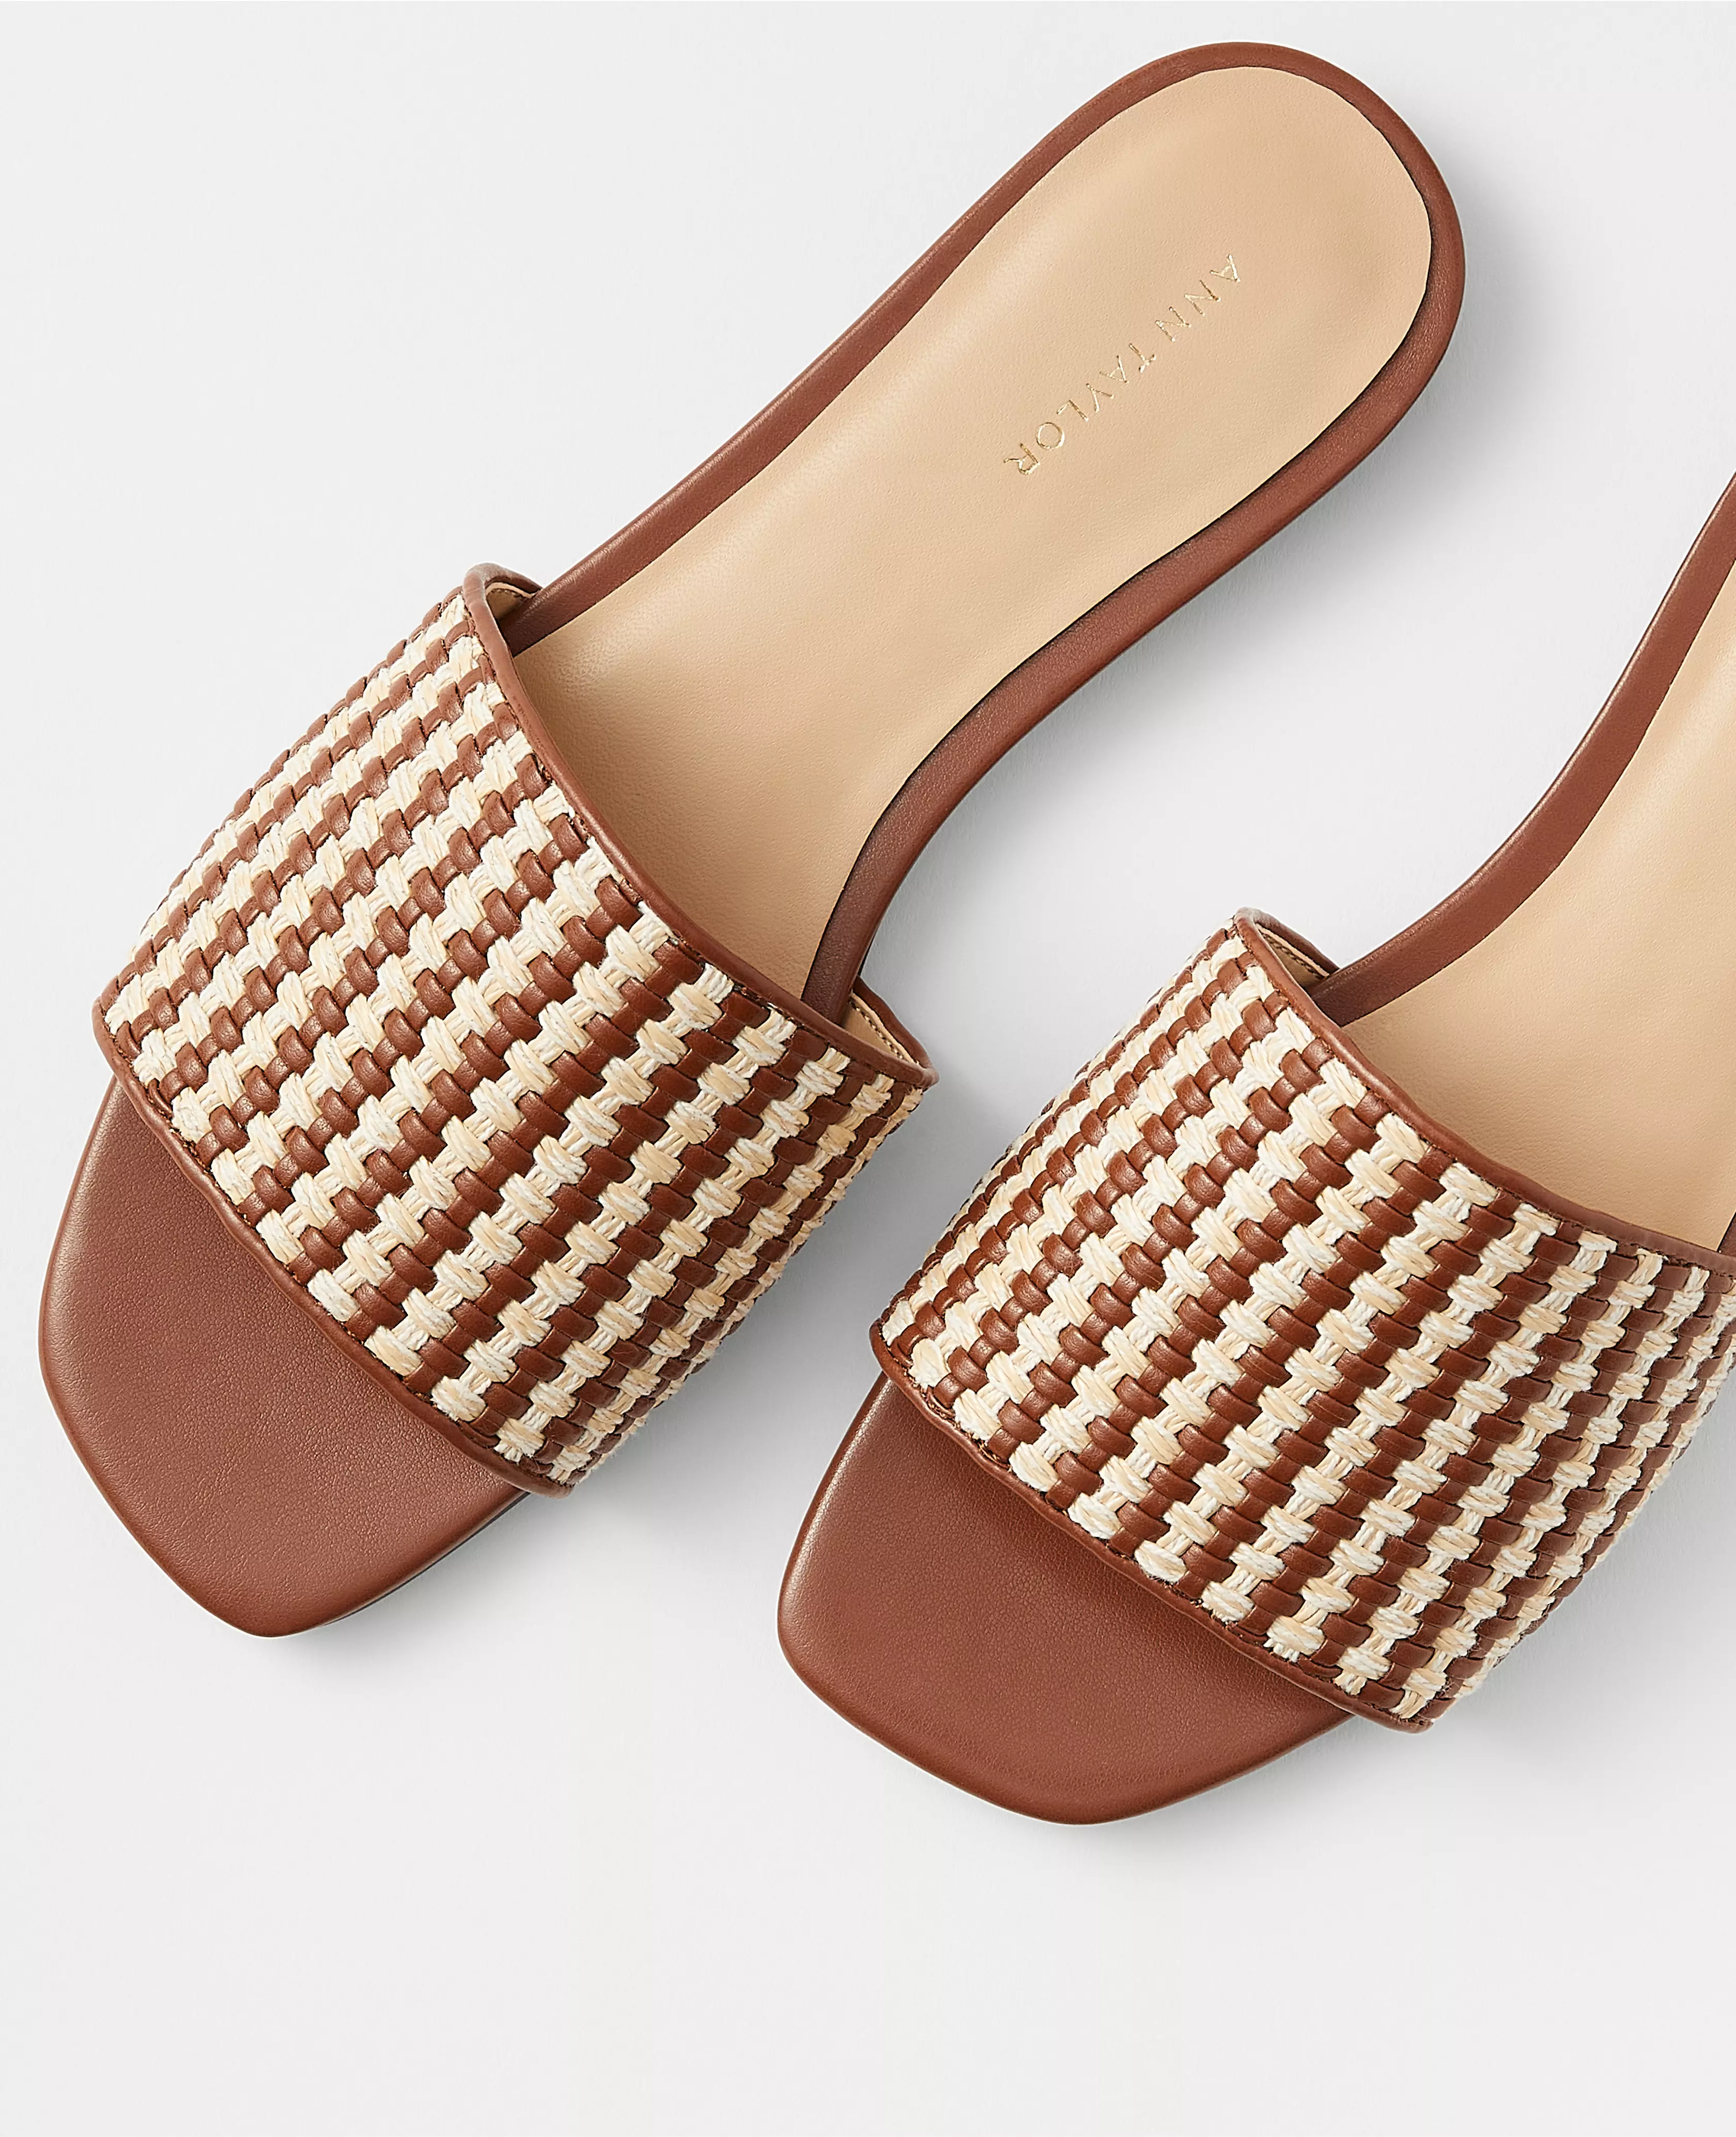 AT Weekend Woven Leather Flat Sandals